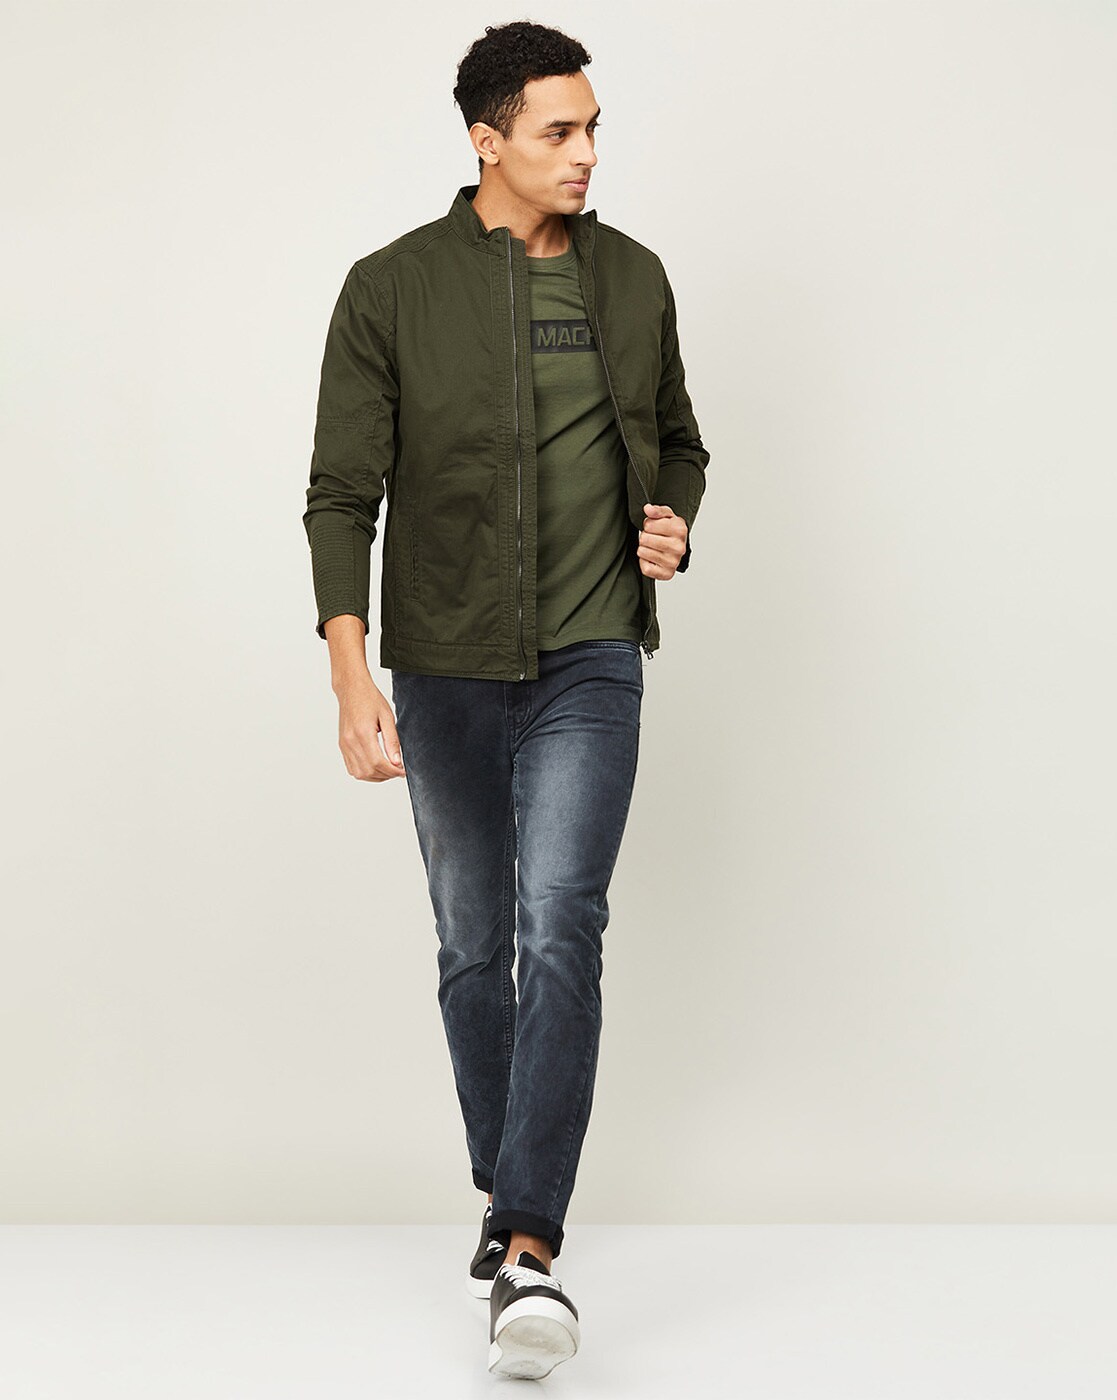 Forca by Lifestyle Olive Cotton Regular Fit Jacket